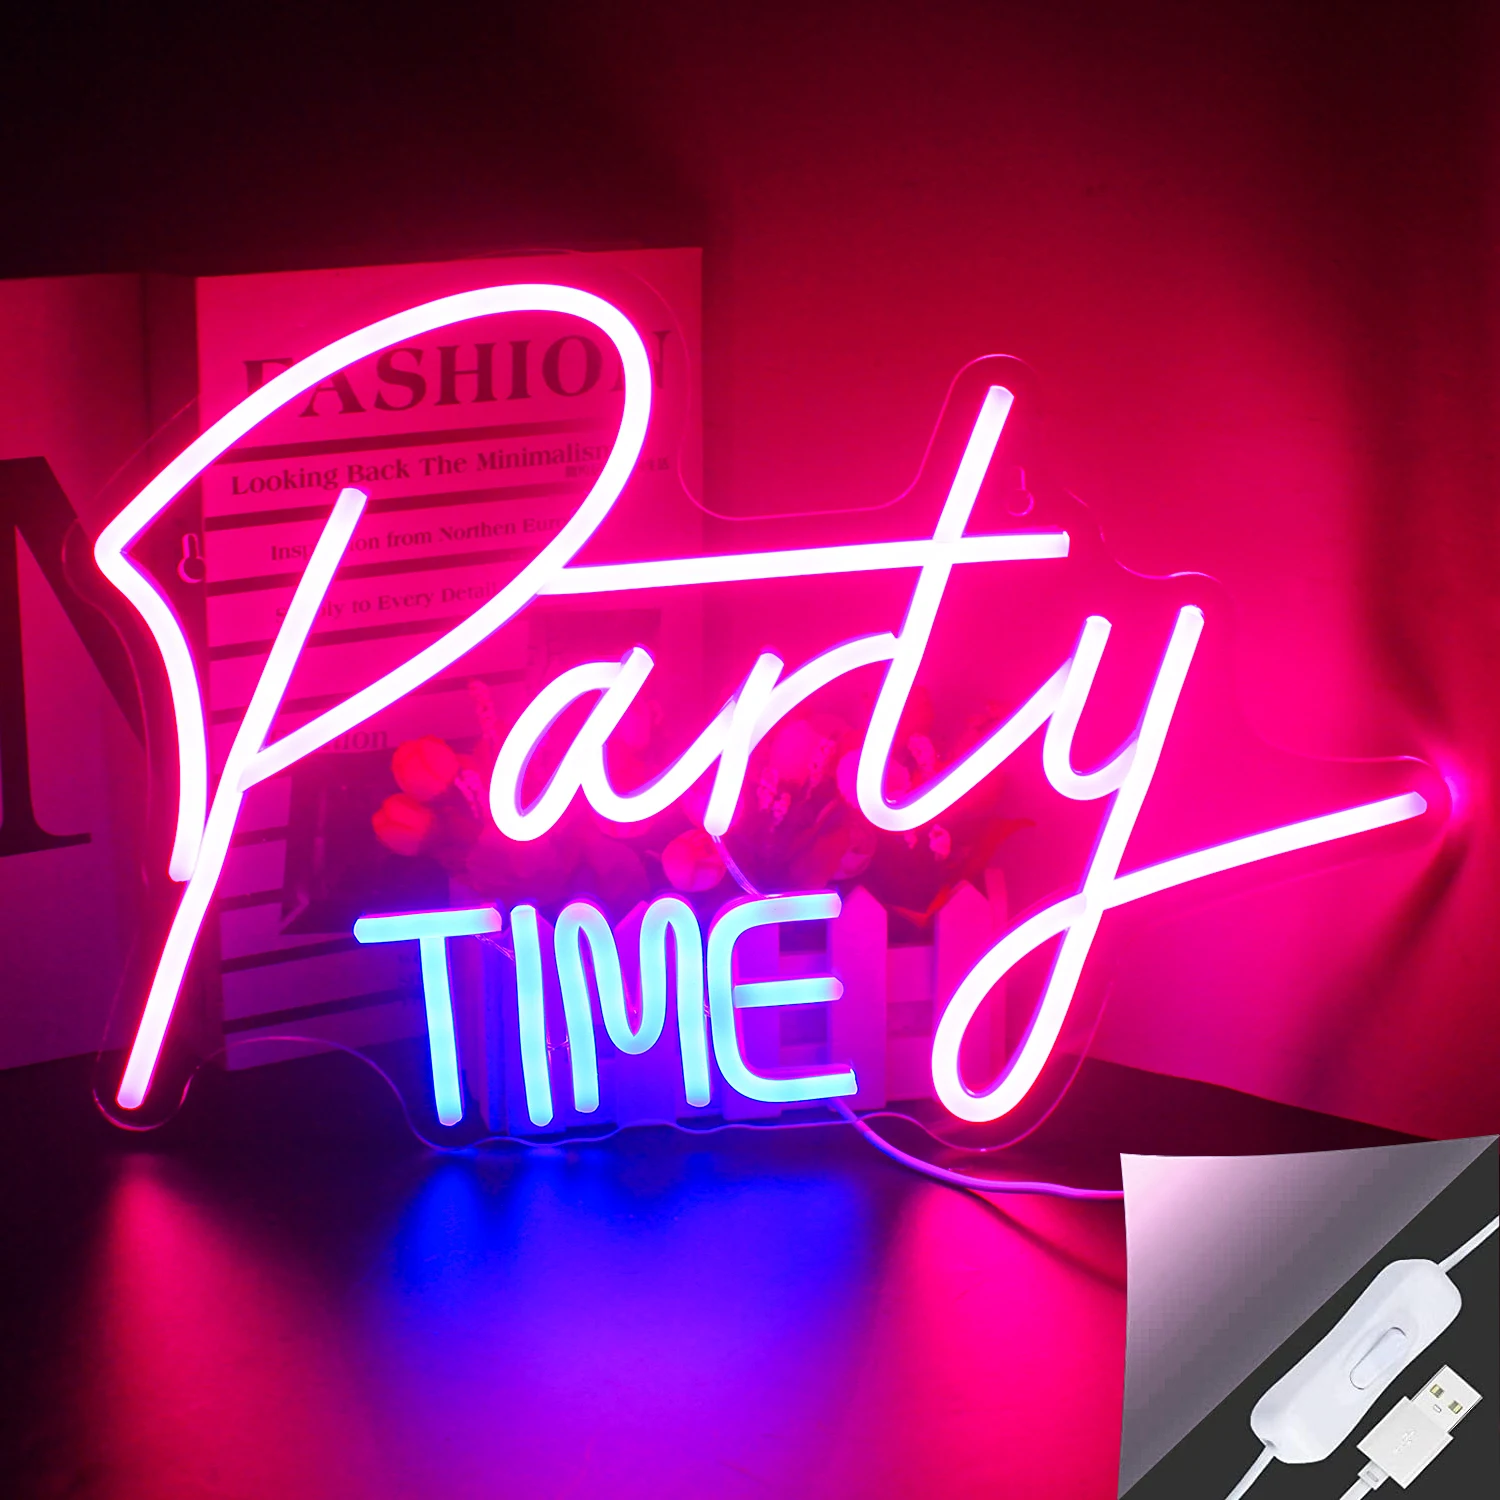 

Neon Sign LED Light Party Time For Birthdays Weddings Club Bar Single Cocktail Dance Holiday Party Wall Decor Neon Night Light